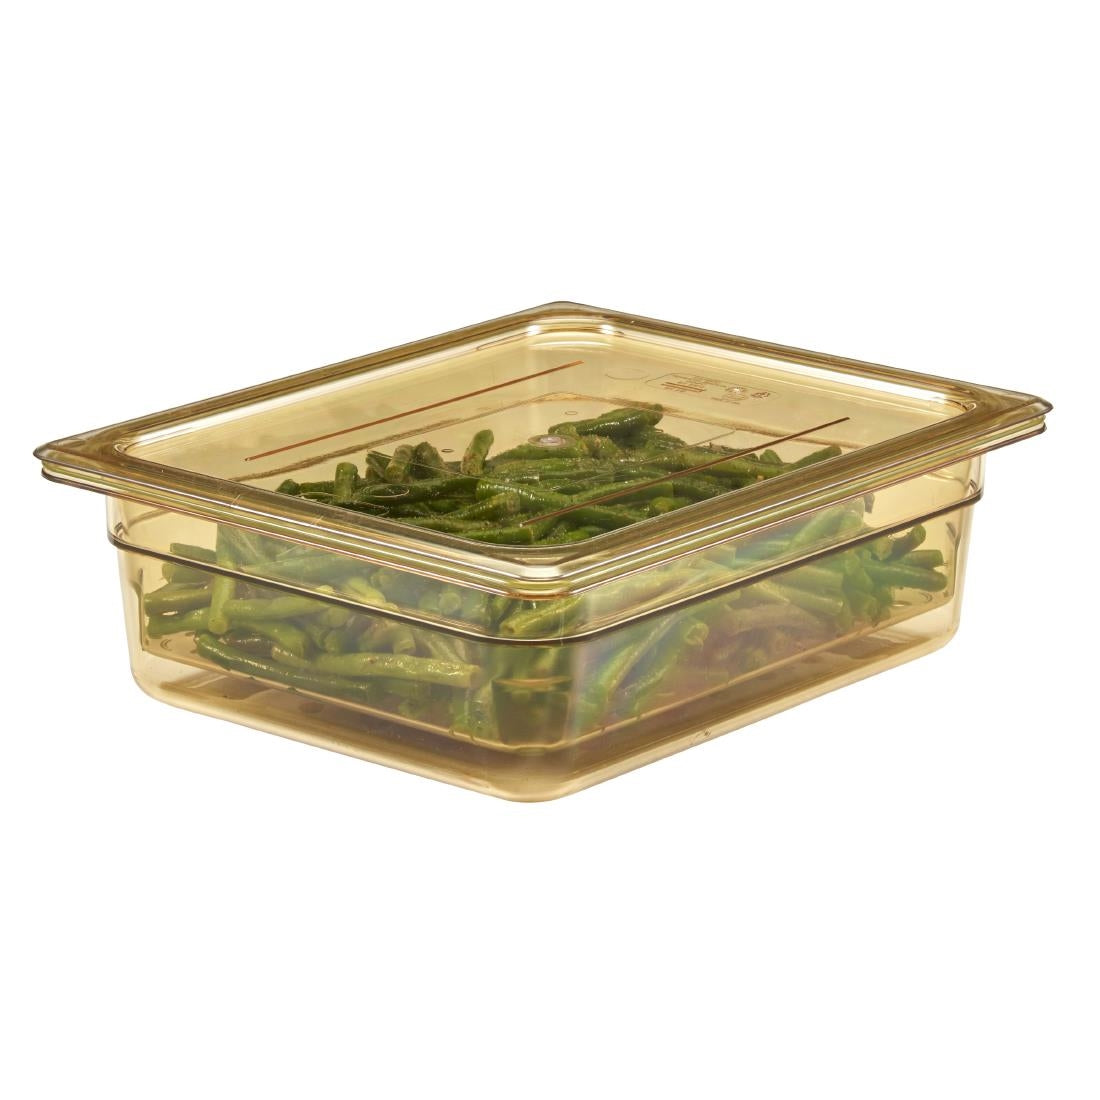 Cambro High Heat 1/2 Gastronorm Food Pan Lid JD Catering Equipment Solutions Ltd